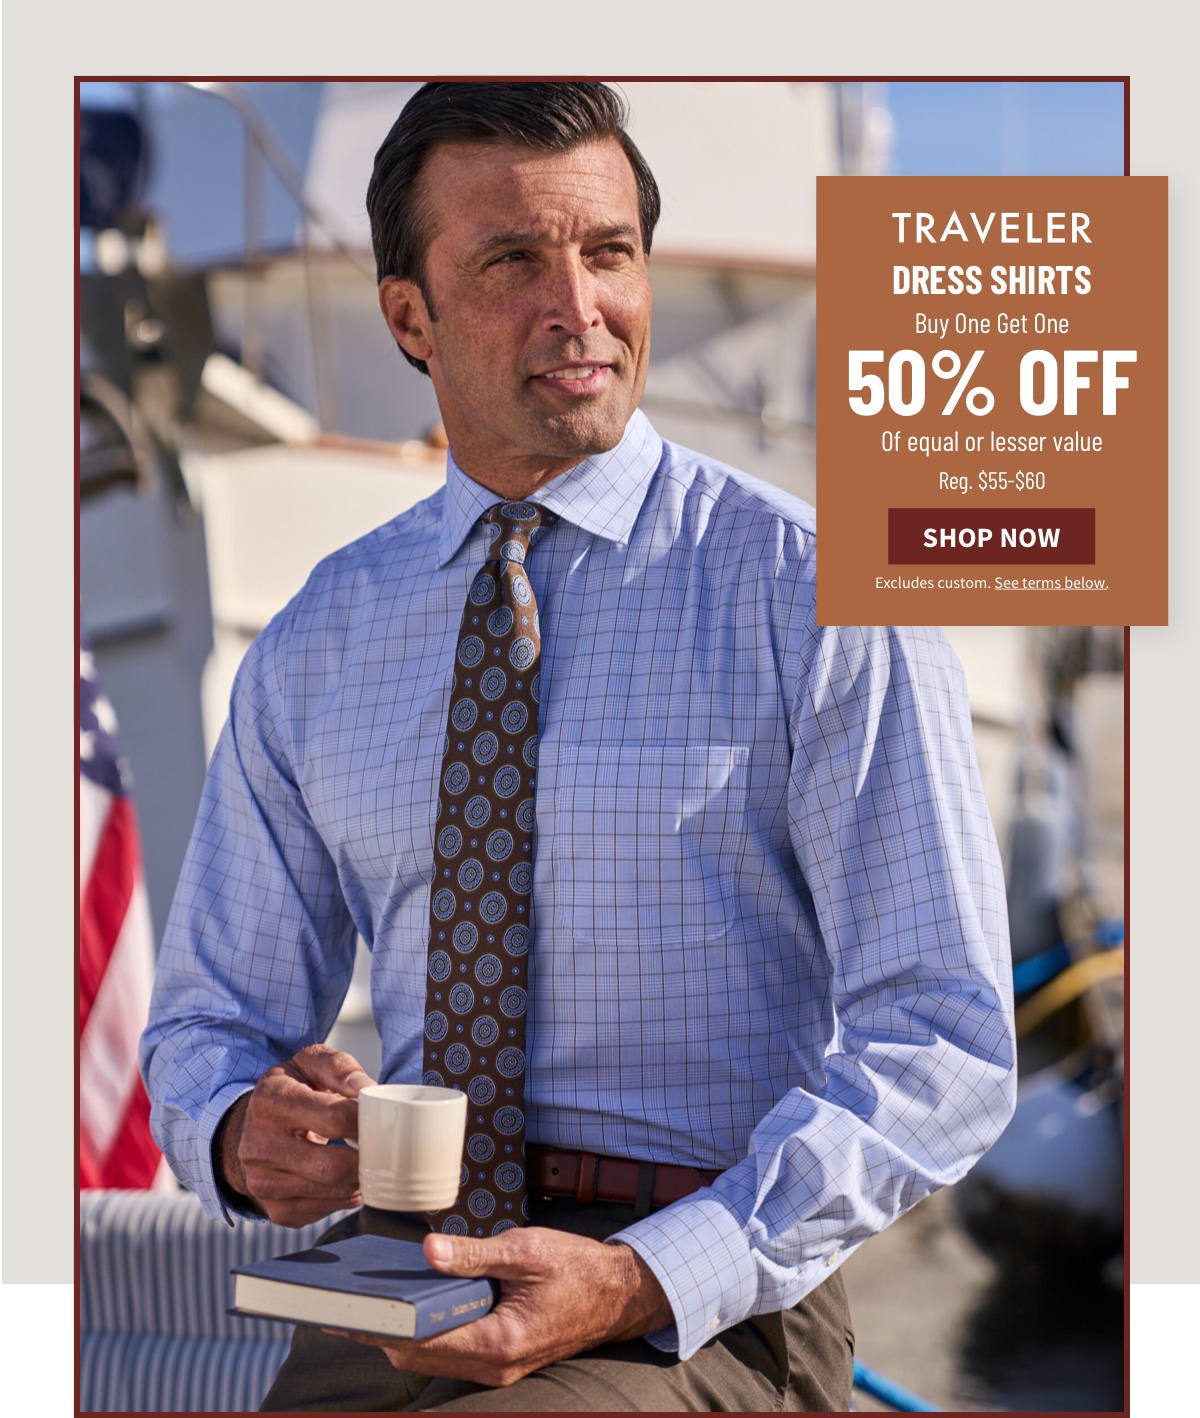 Traveler Dress Shirts Buy One Get One 50% off Of equal or lesser value Reg. $55-$60 Shop Now Excludes custom. See terms below.